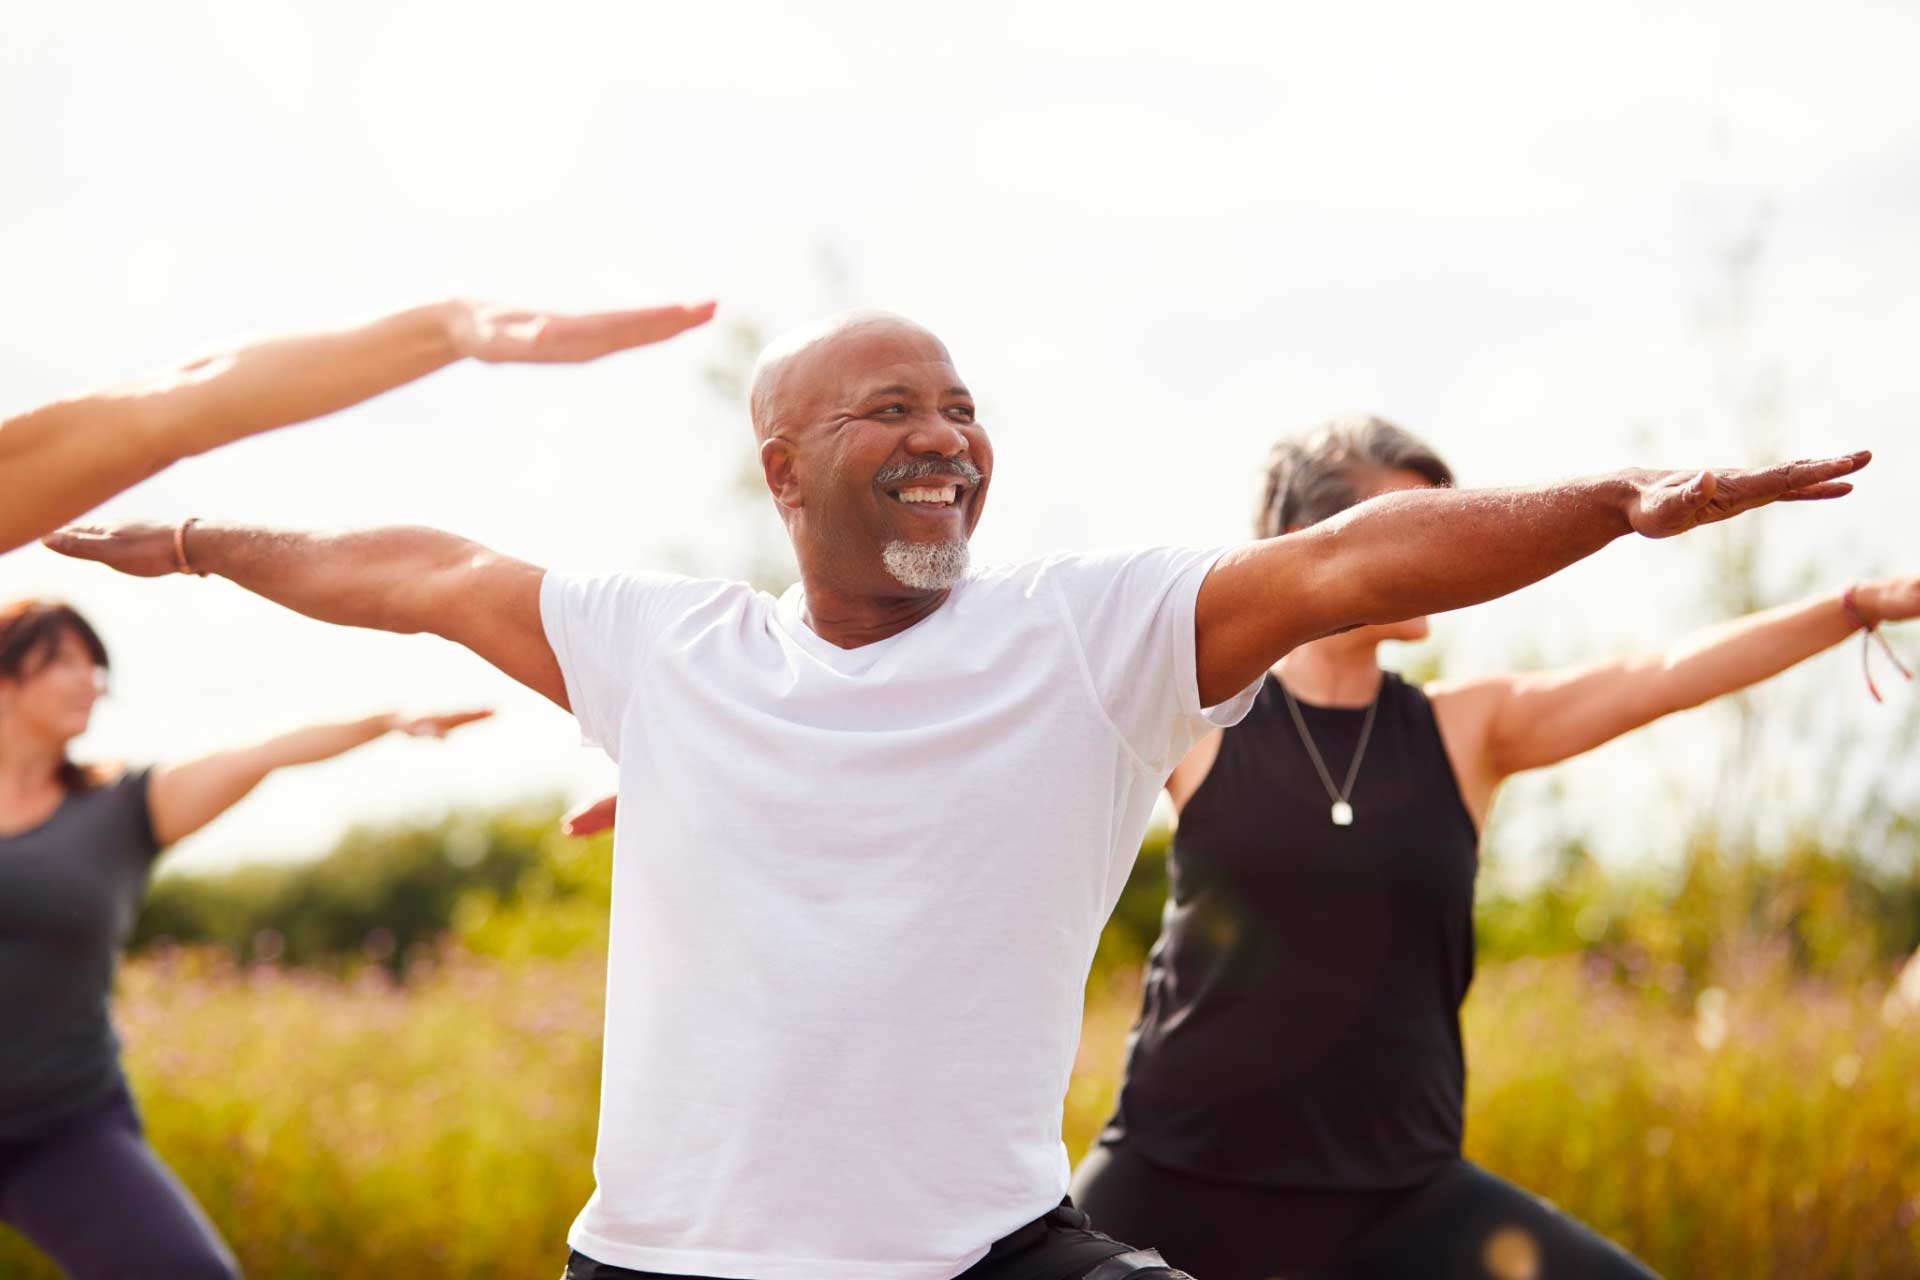 Smiling older African-American man in white t-shirt doing outdoor yoga on a sunny day, representing wellness and health.